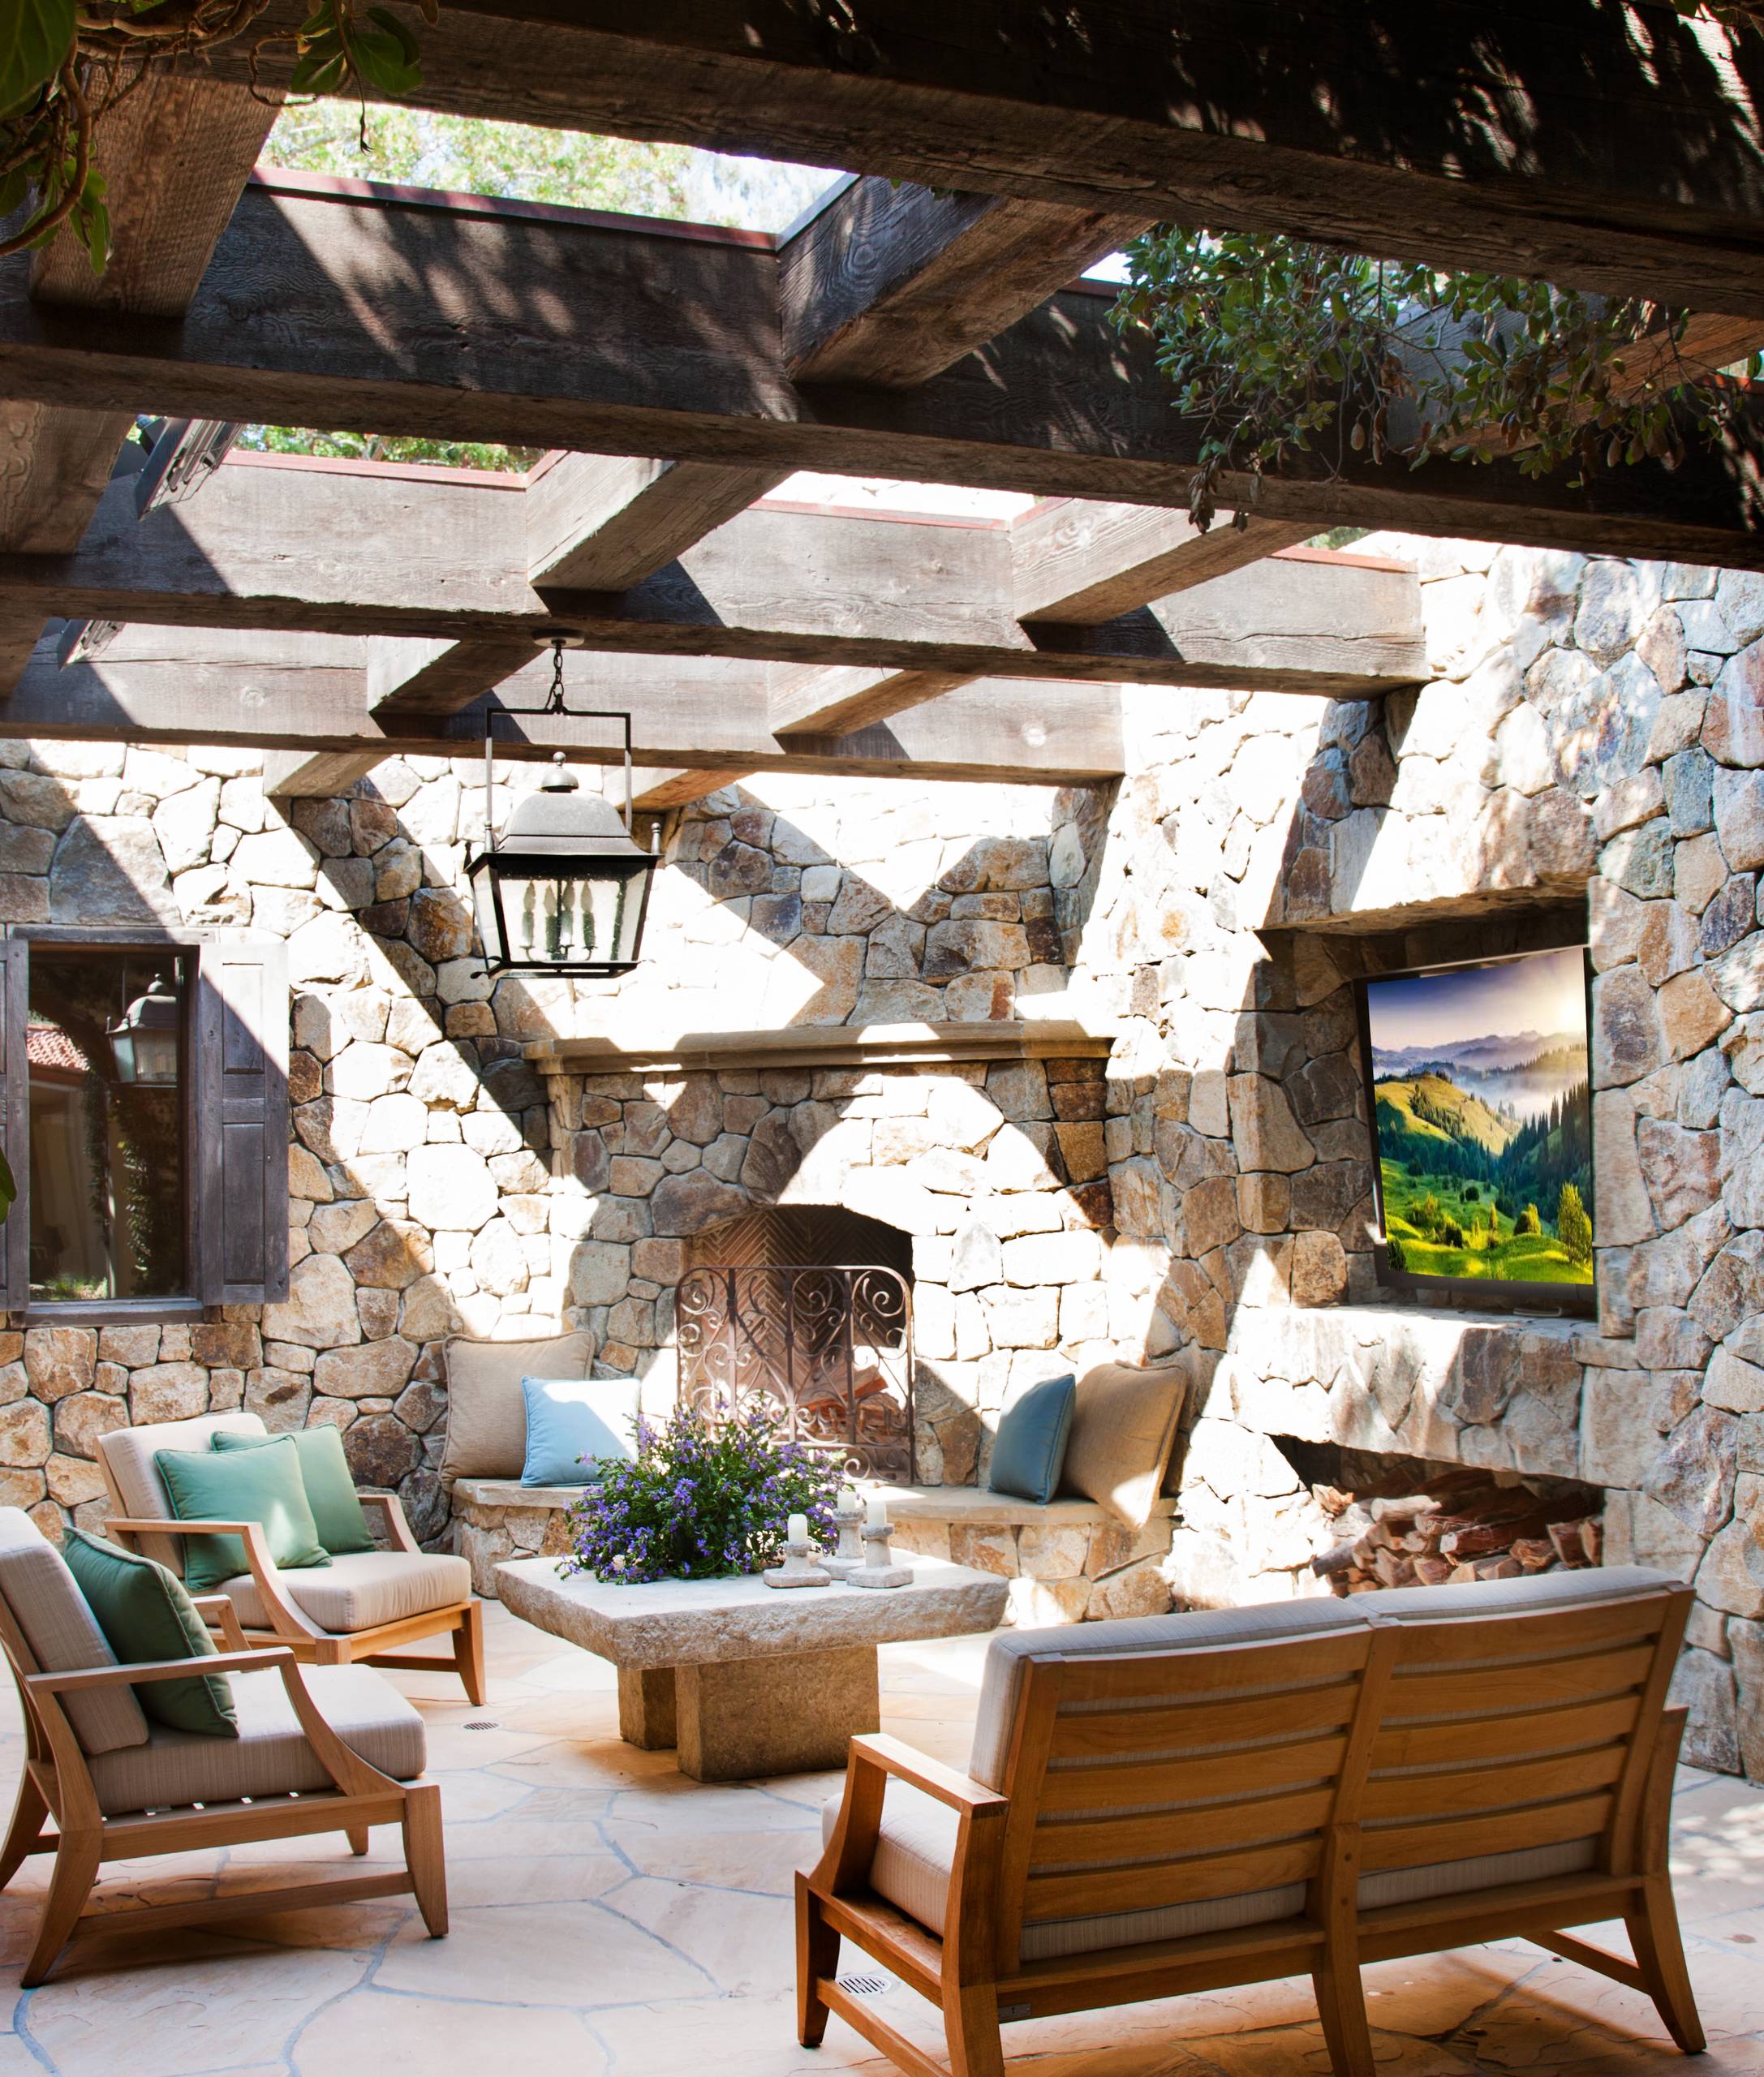 Designing Outdoor Spaces With Mediterranean Flair